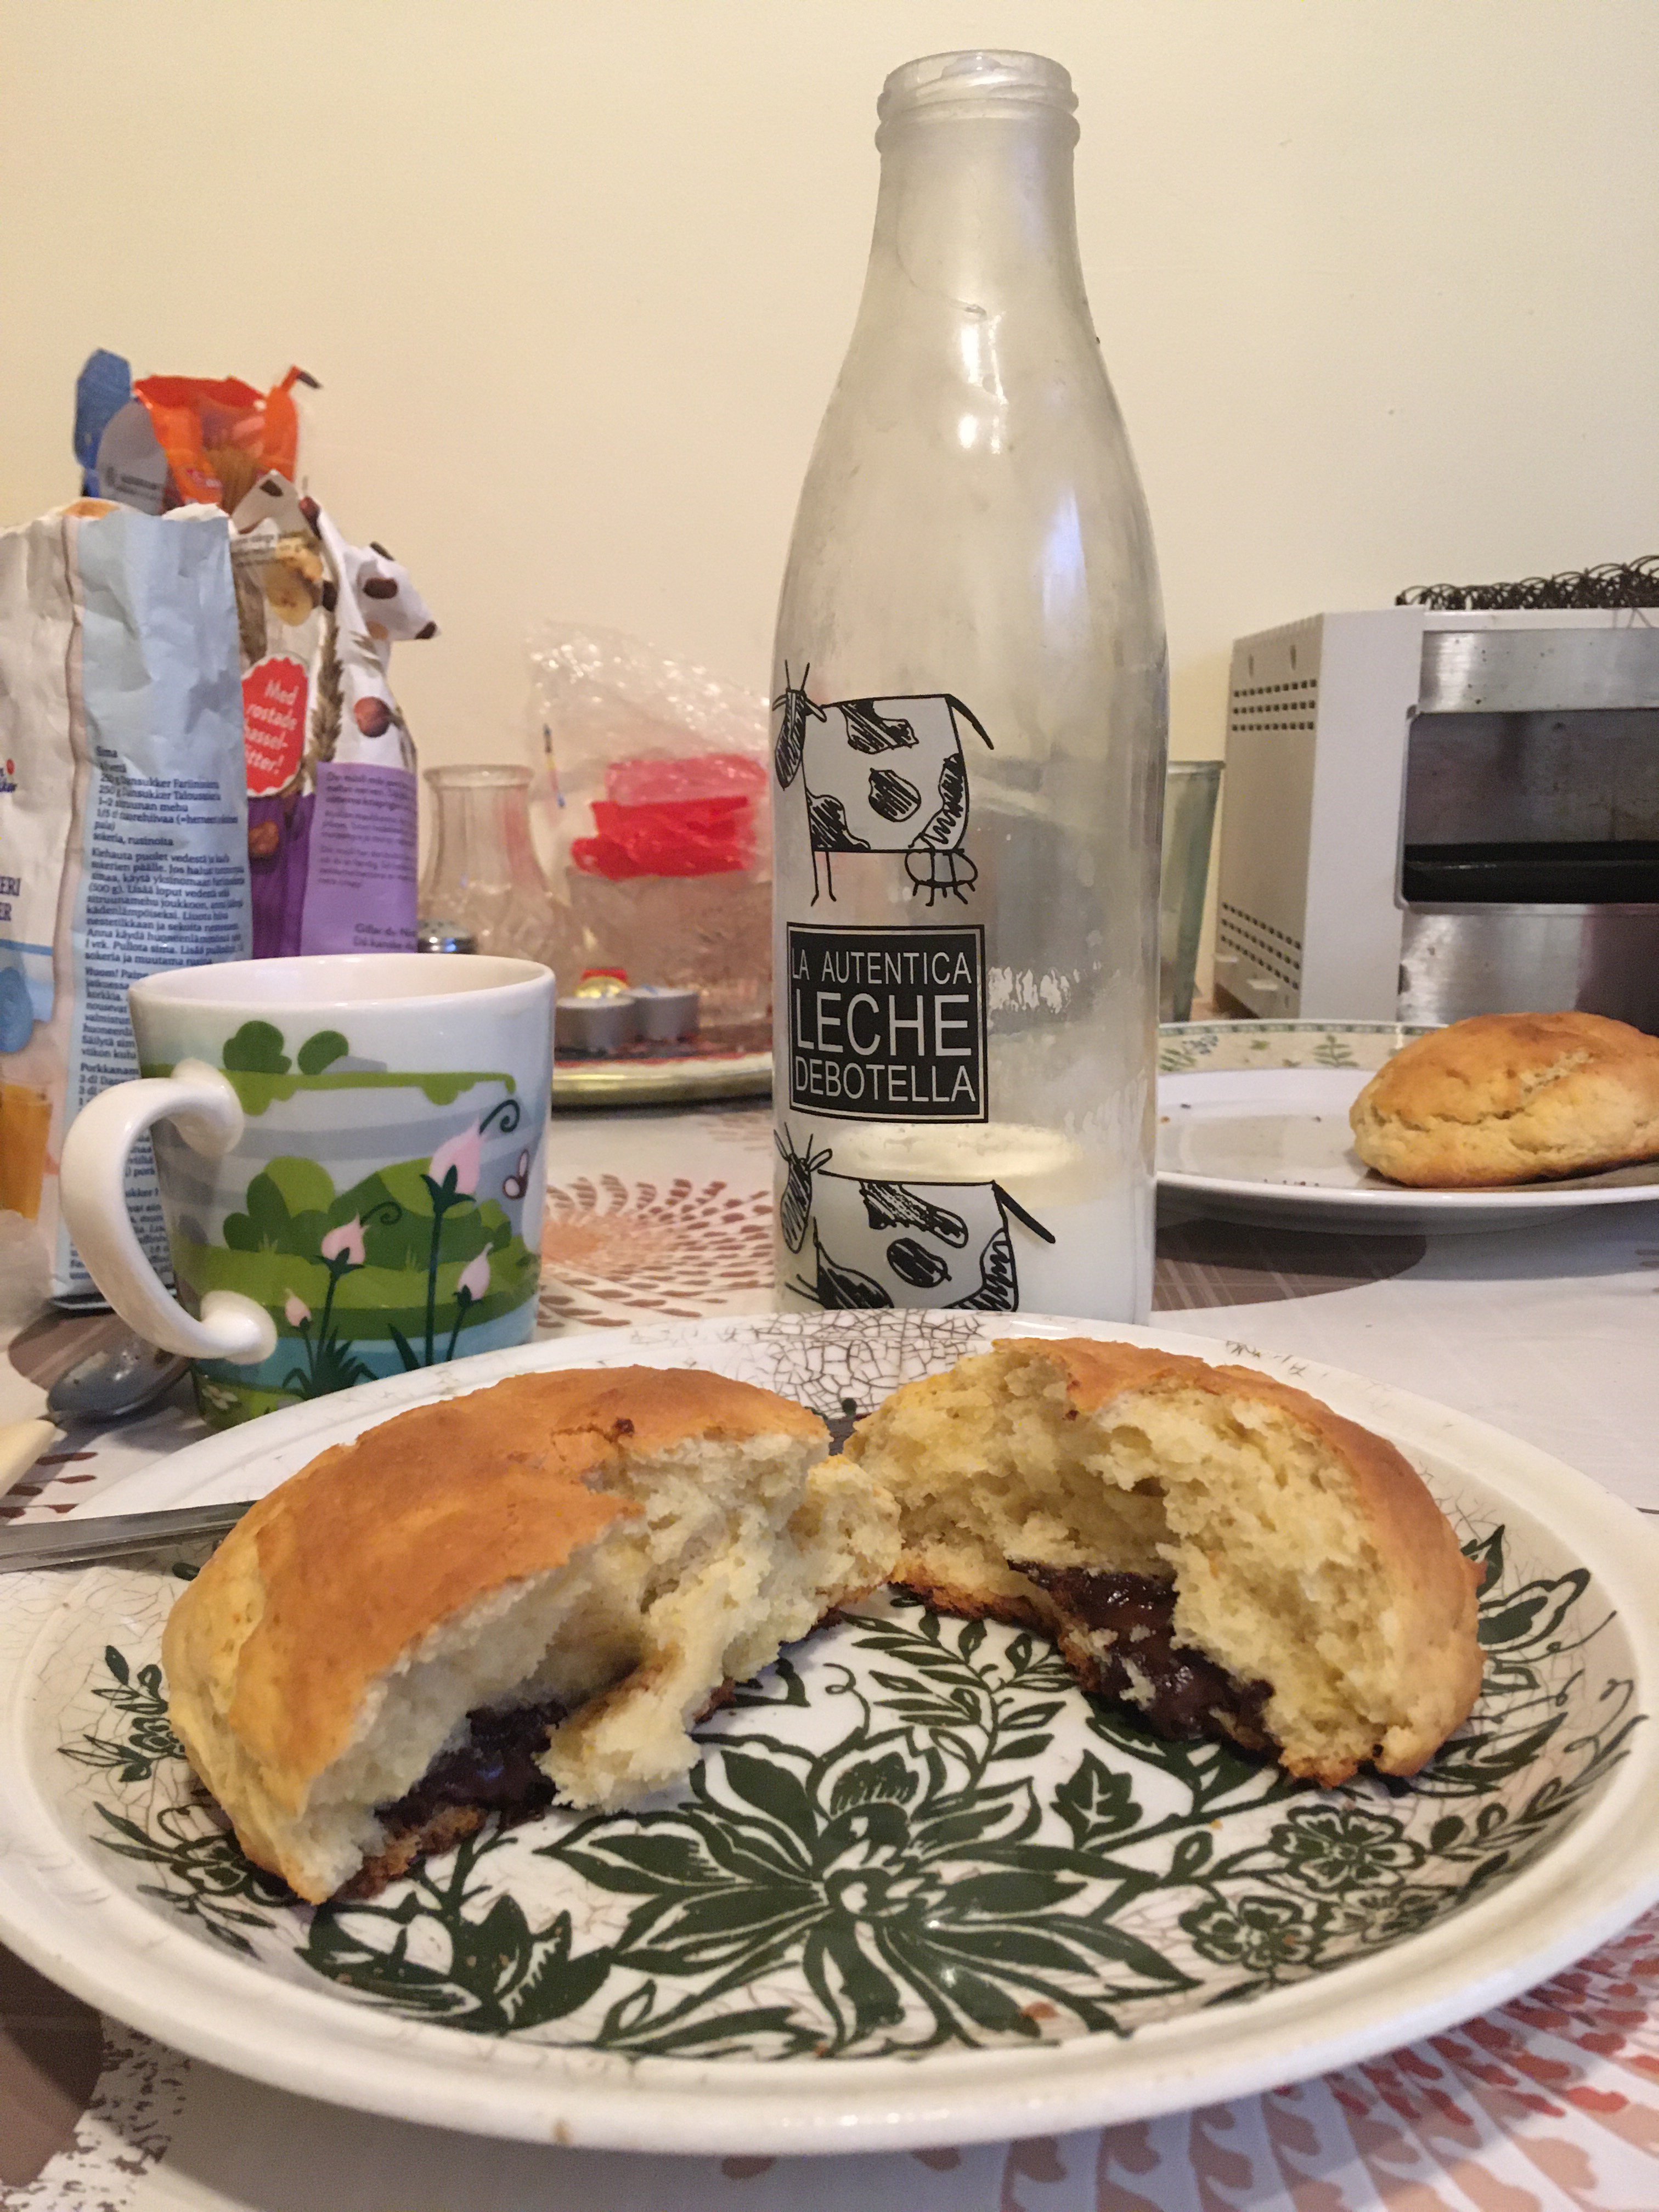 A scone sits broken in half on a plate, in front of a glass bottle of milk